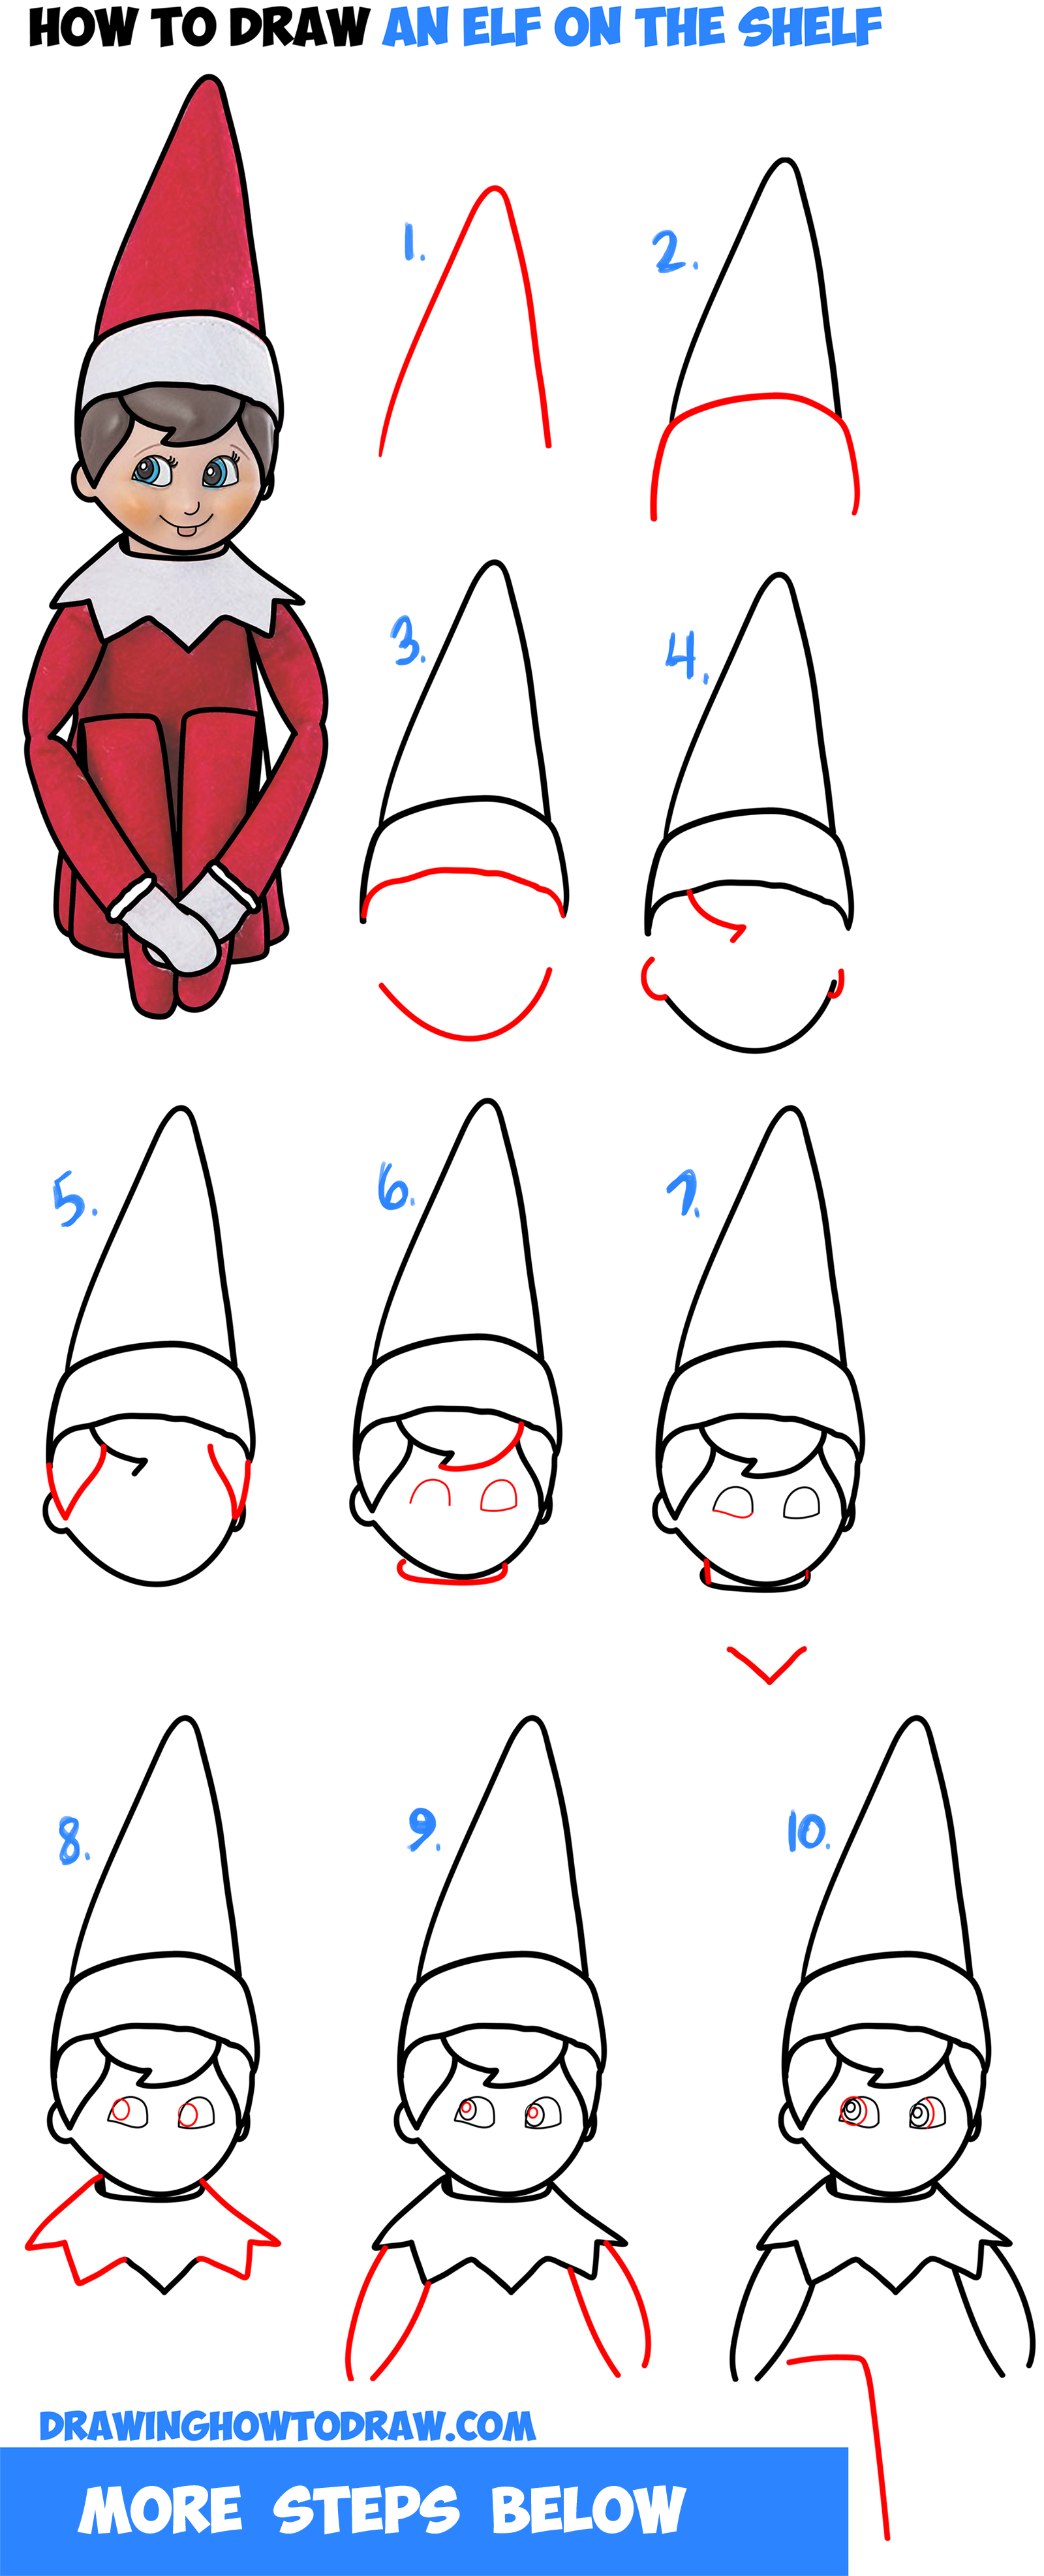 Best How To Draw Elf On The Shelf of all time Learn more here 